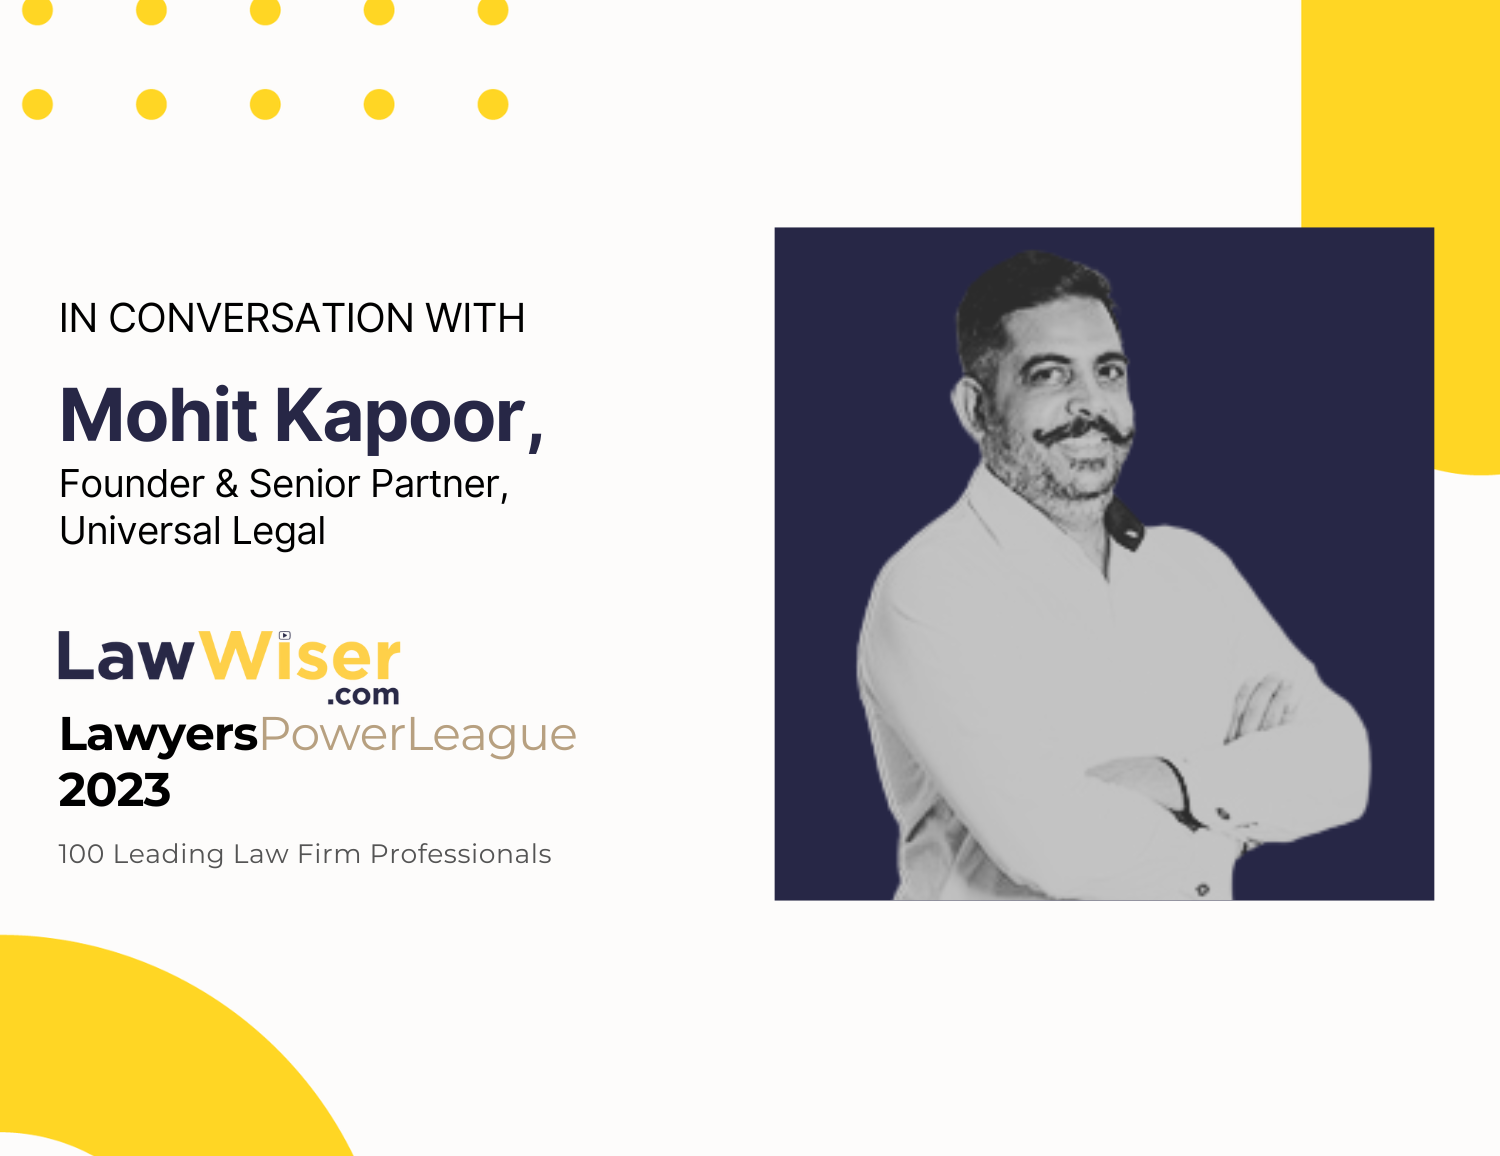 In Conversation with Mohit Kapoor of Universal Legal